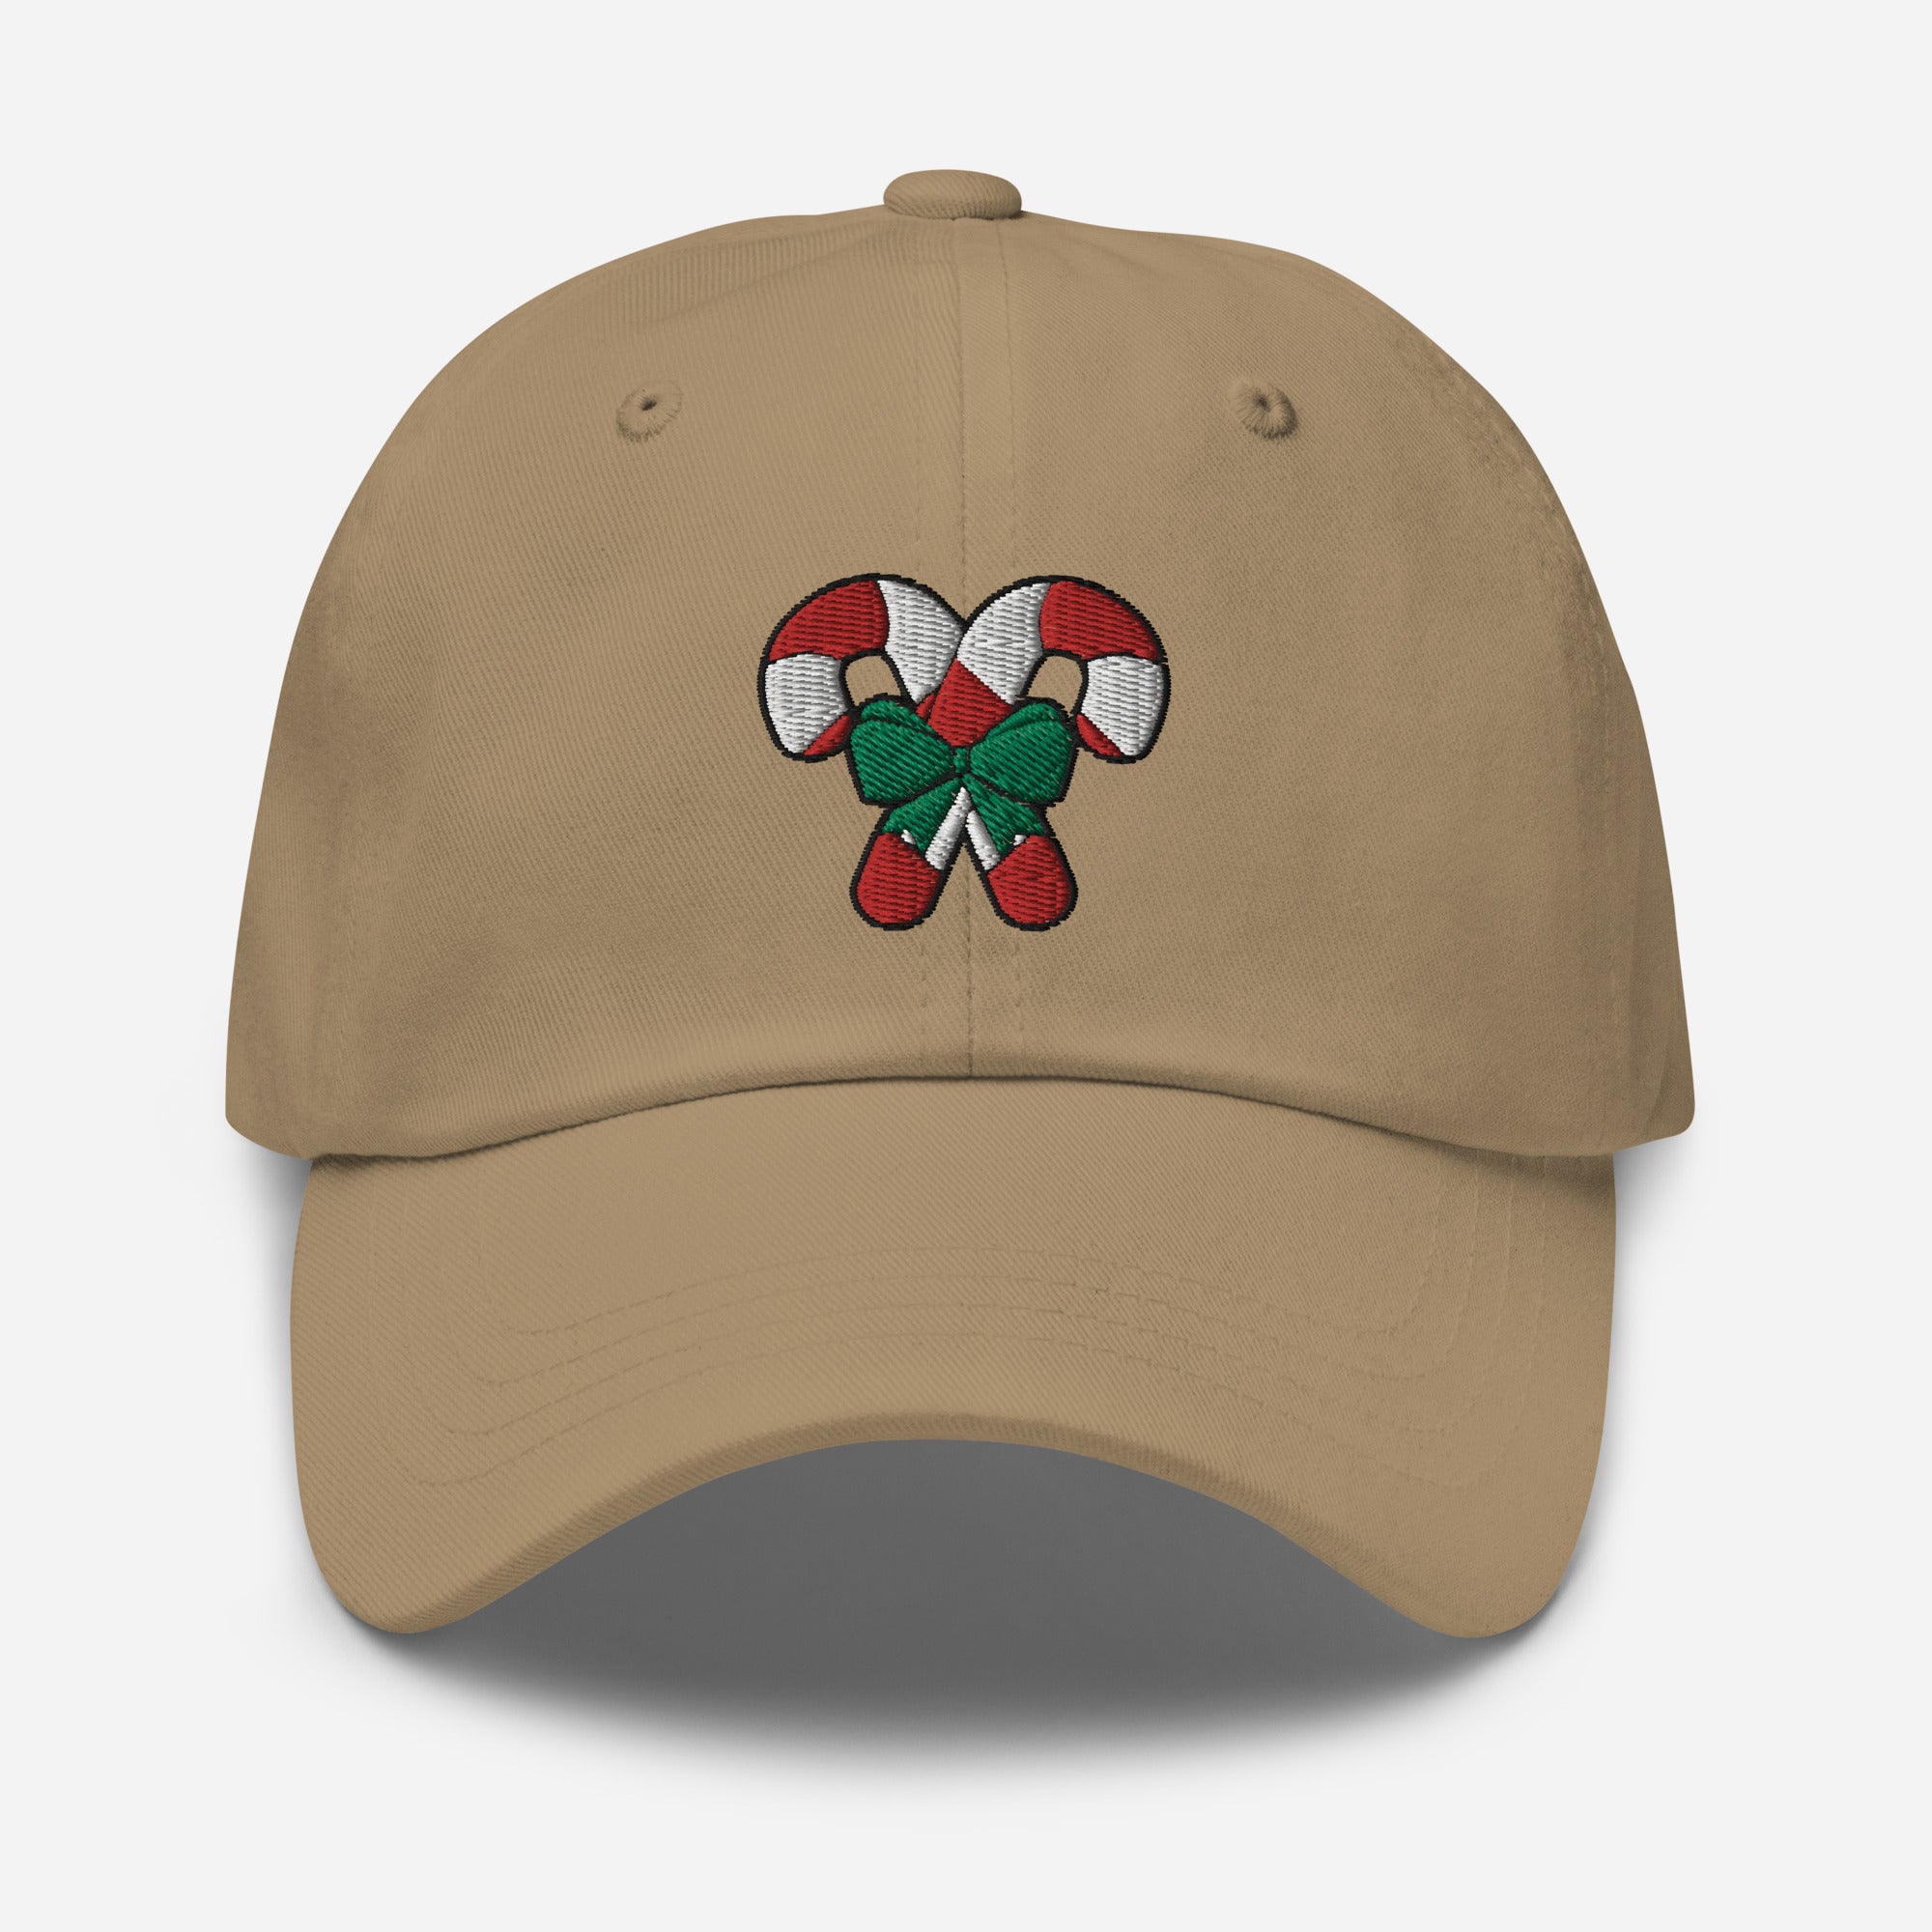 Candy Cane Dad Hat, Embroidered Christmas Unisex Hat, Handmade Dad Cap, Xmas Festive Adjustable Baseball Gift Cap